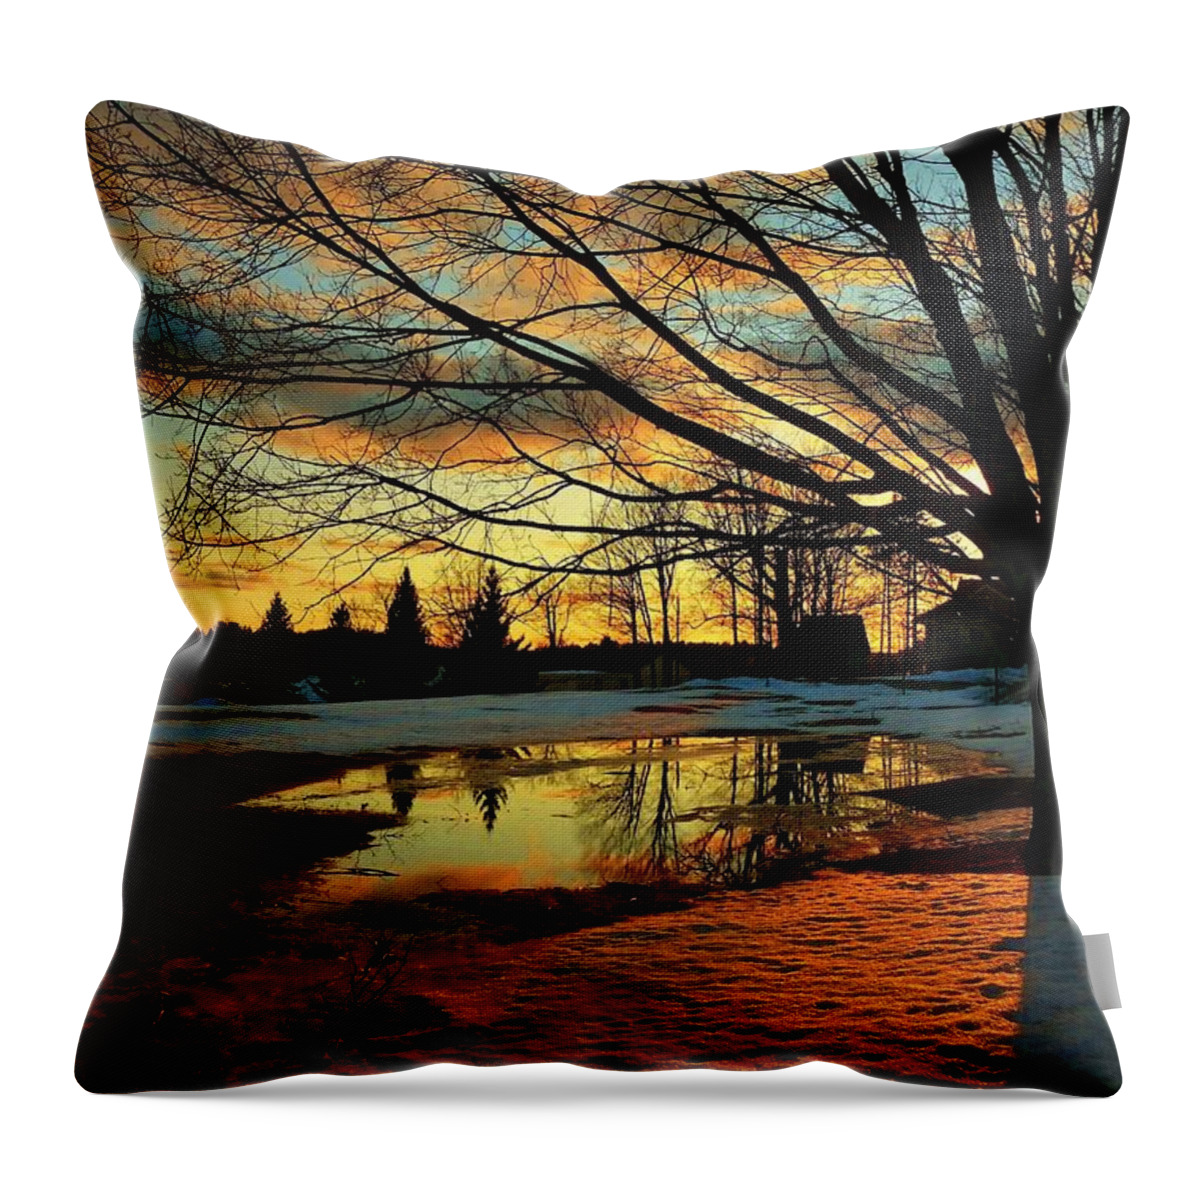 Landscape Throw Pillow featuring the photograph Sunset Shadows by Elaine Franklin